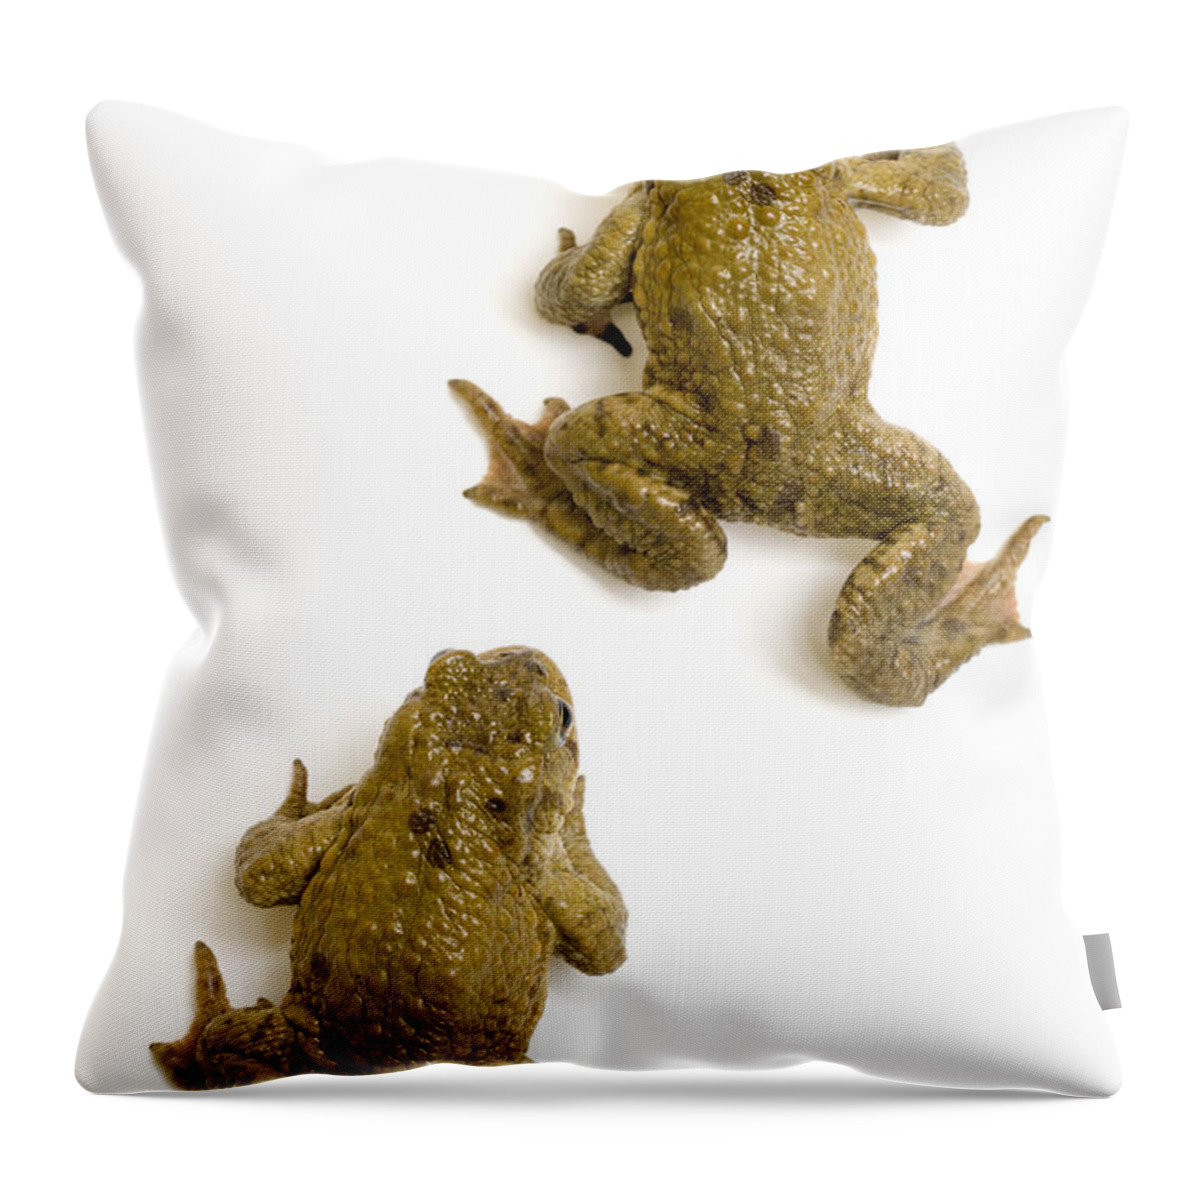 Common Toad Throw Pillow featuring the photograph Common Toad by Mark Bowler and Photo Researchers